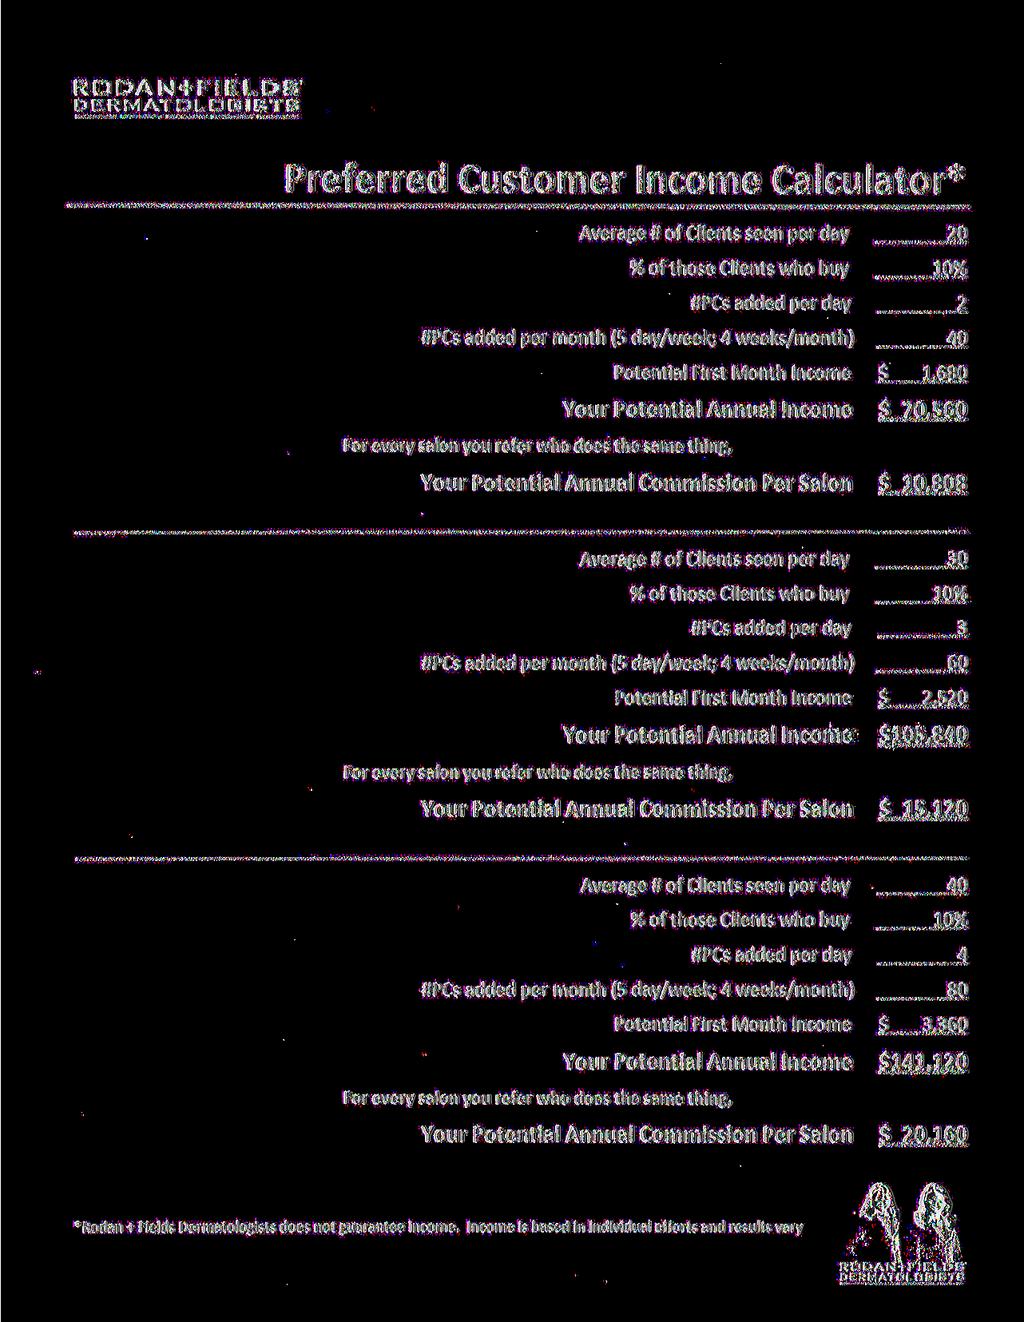 RODAN-f-FIELDS PER M ATDLOGIST5 Preferred Customer Income Calculator* Average # of Clients seen per day 20 % of those Clients who buy 10% #PCs added per day 2 #PCs added per month (5 day/week; 4